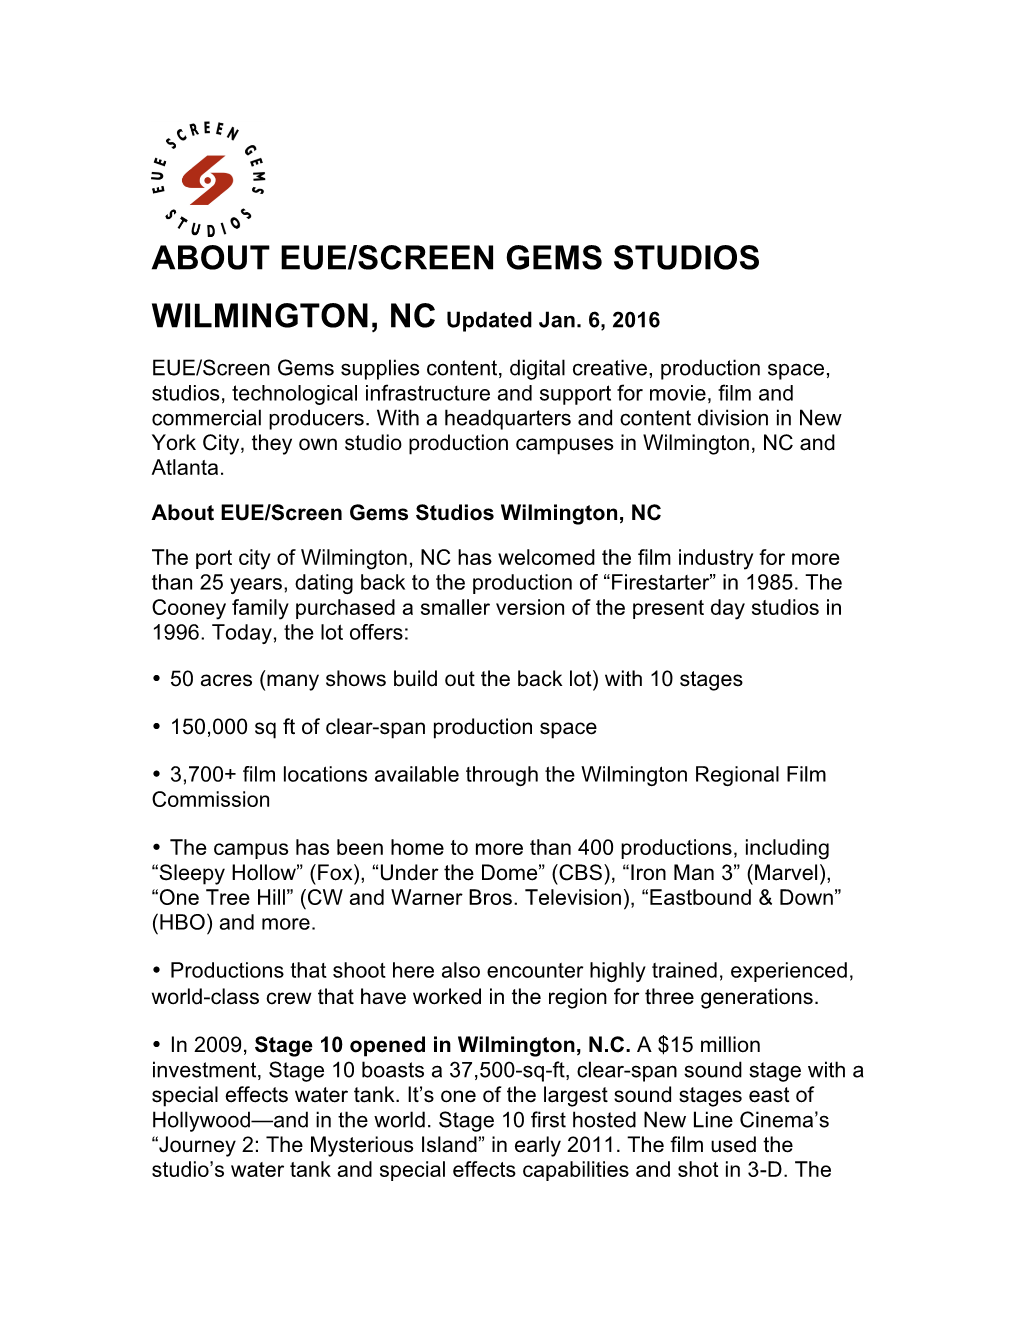 About Eue/Screen Gems Studios